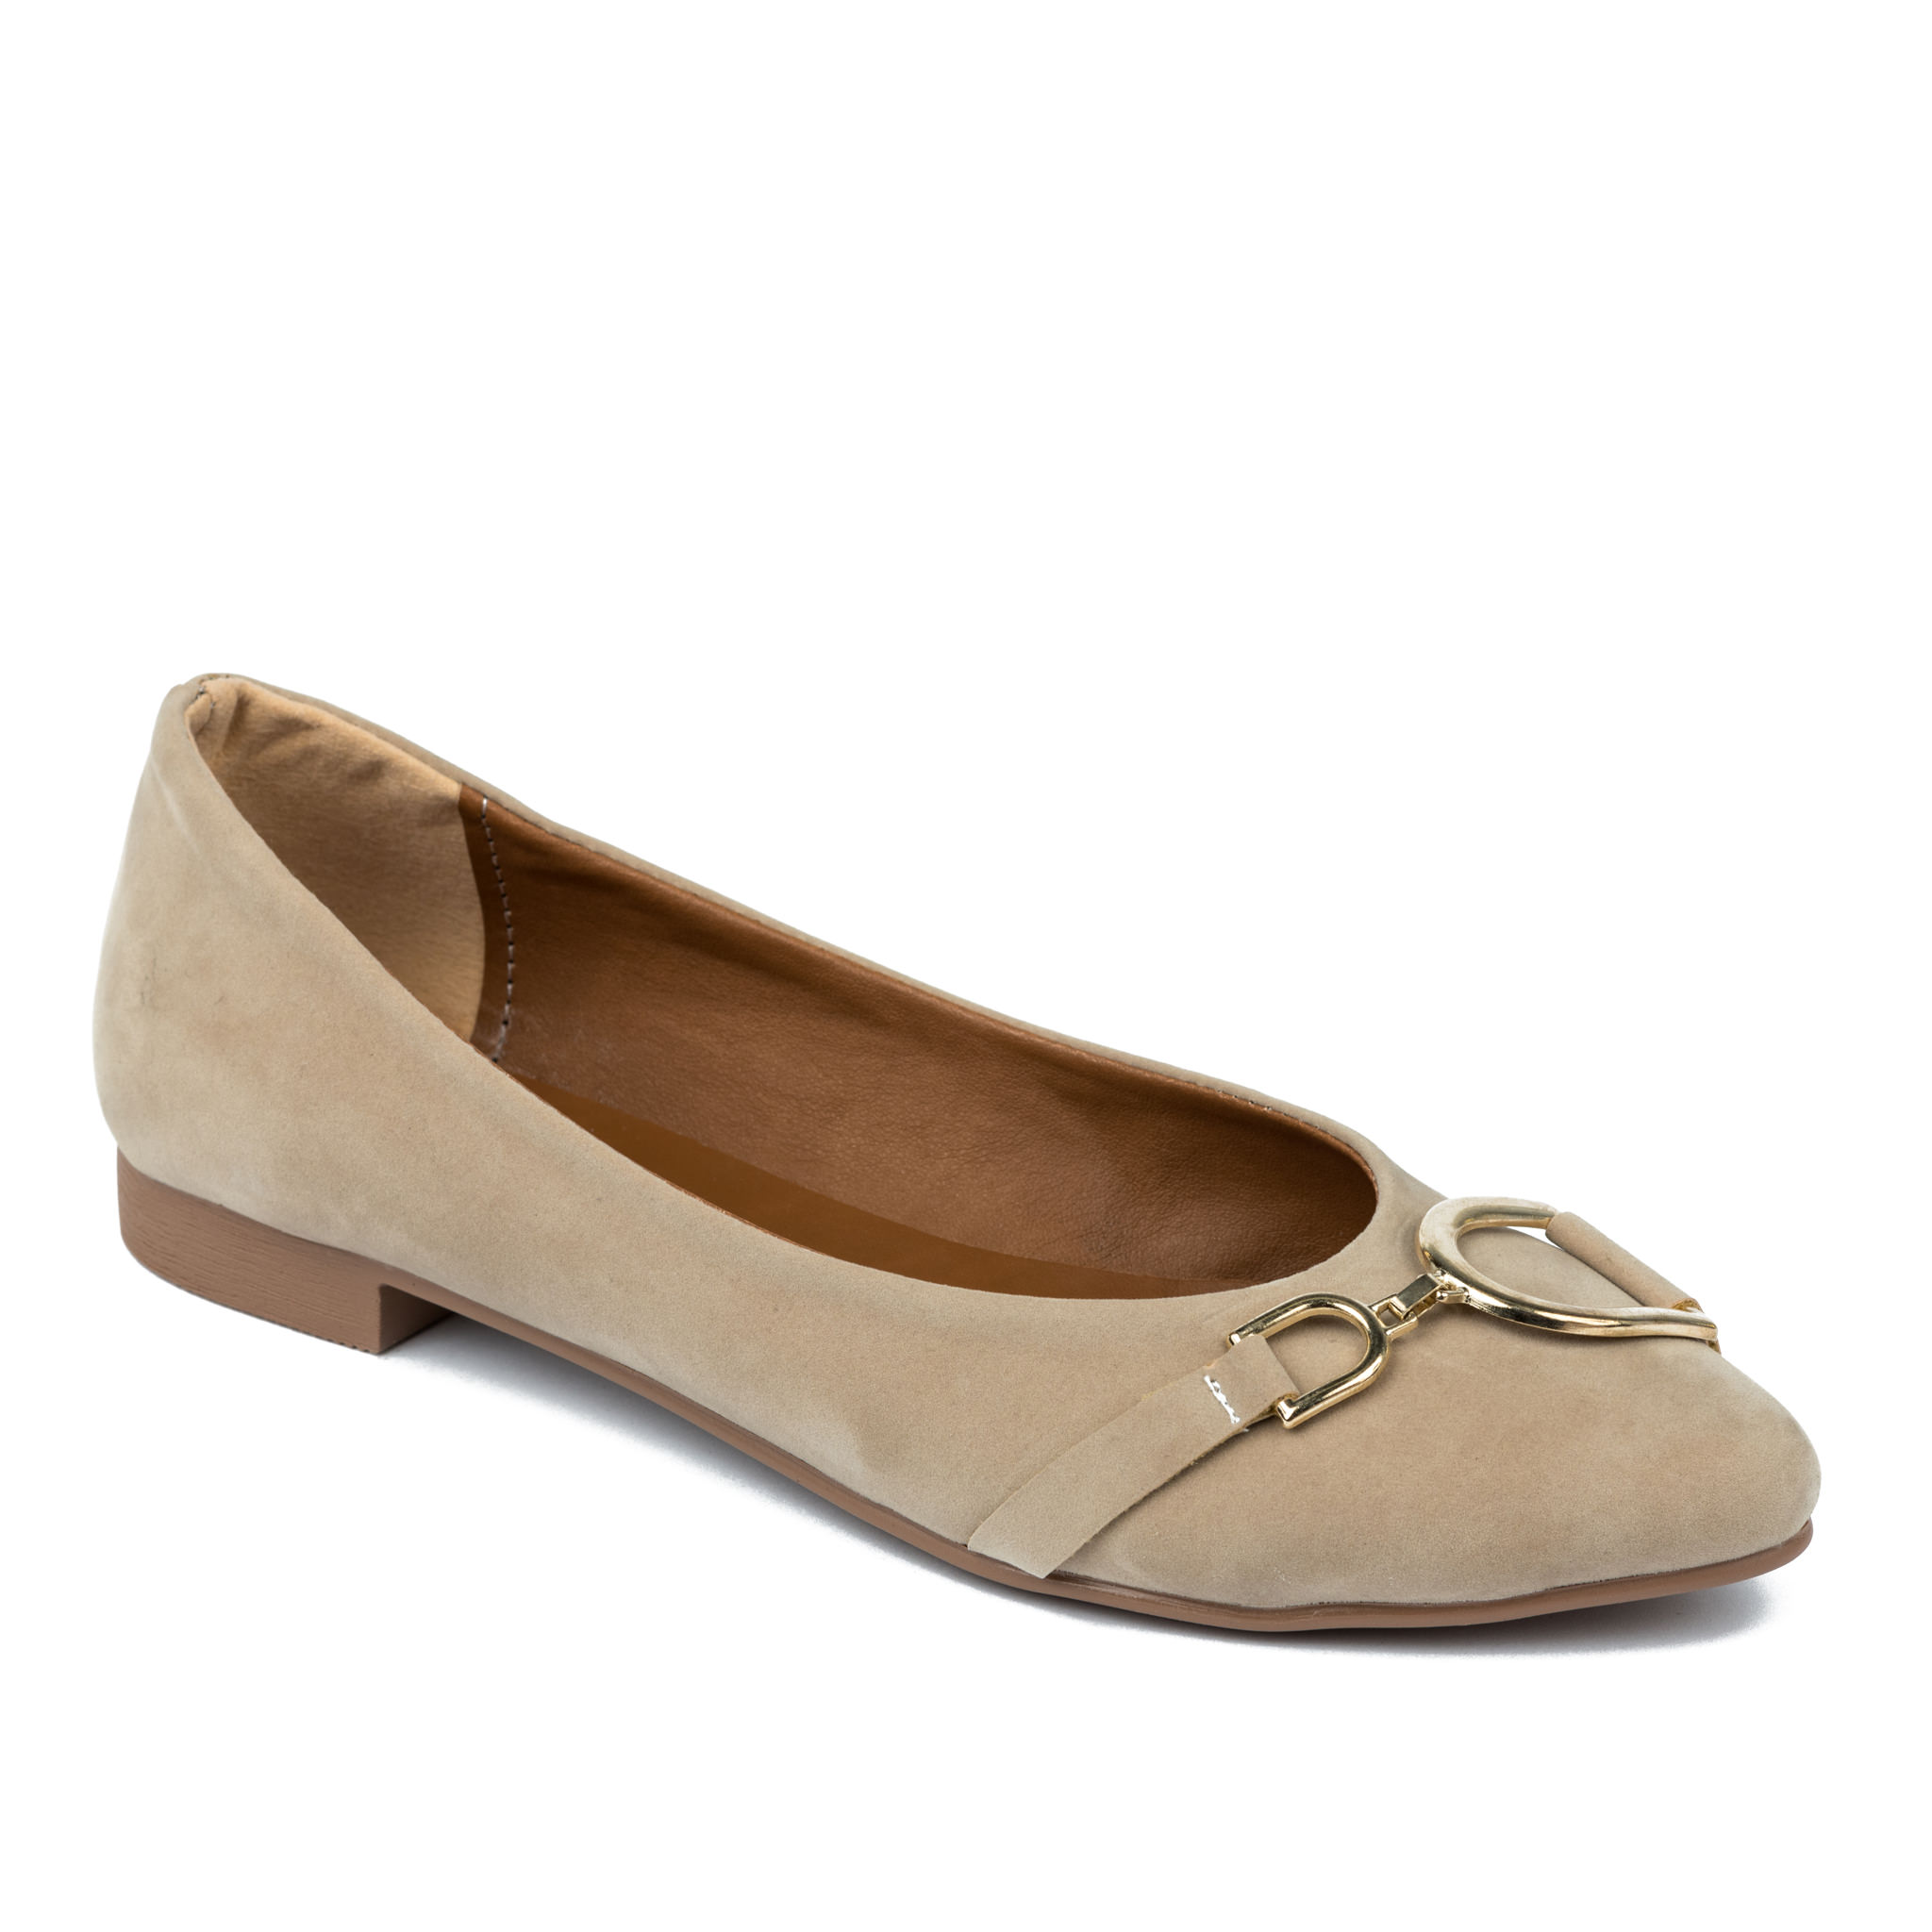 PLUSH FLATS WITH ORNAMENTS - BEIGE